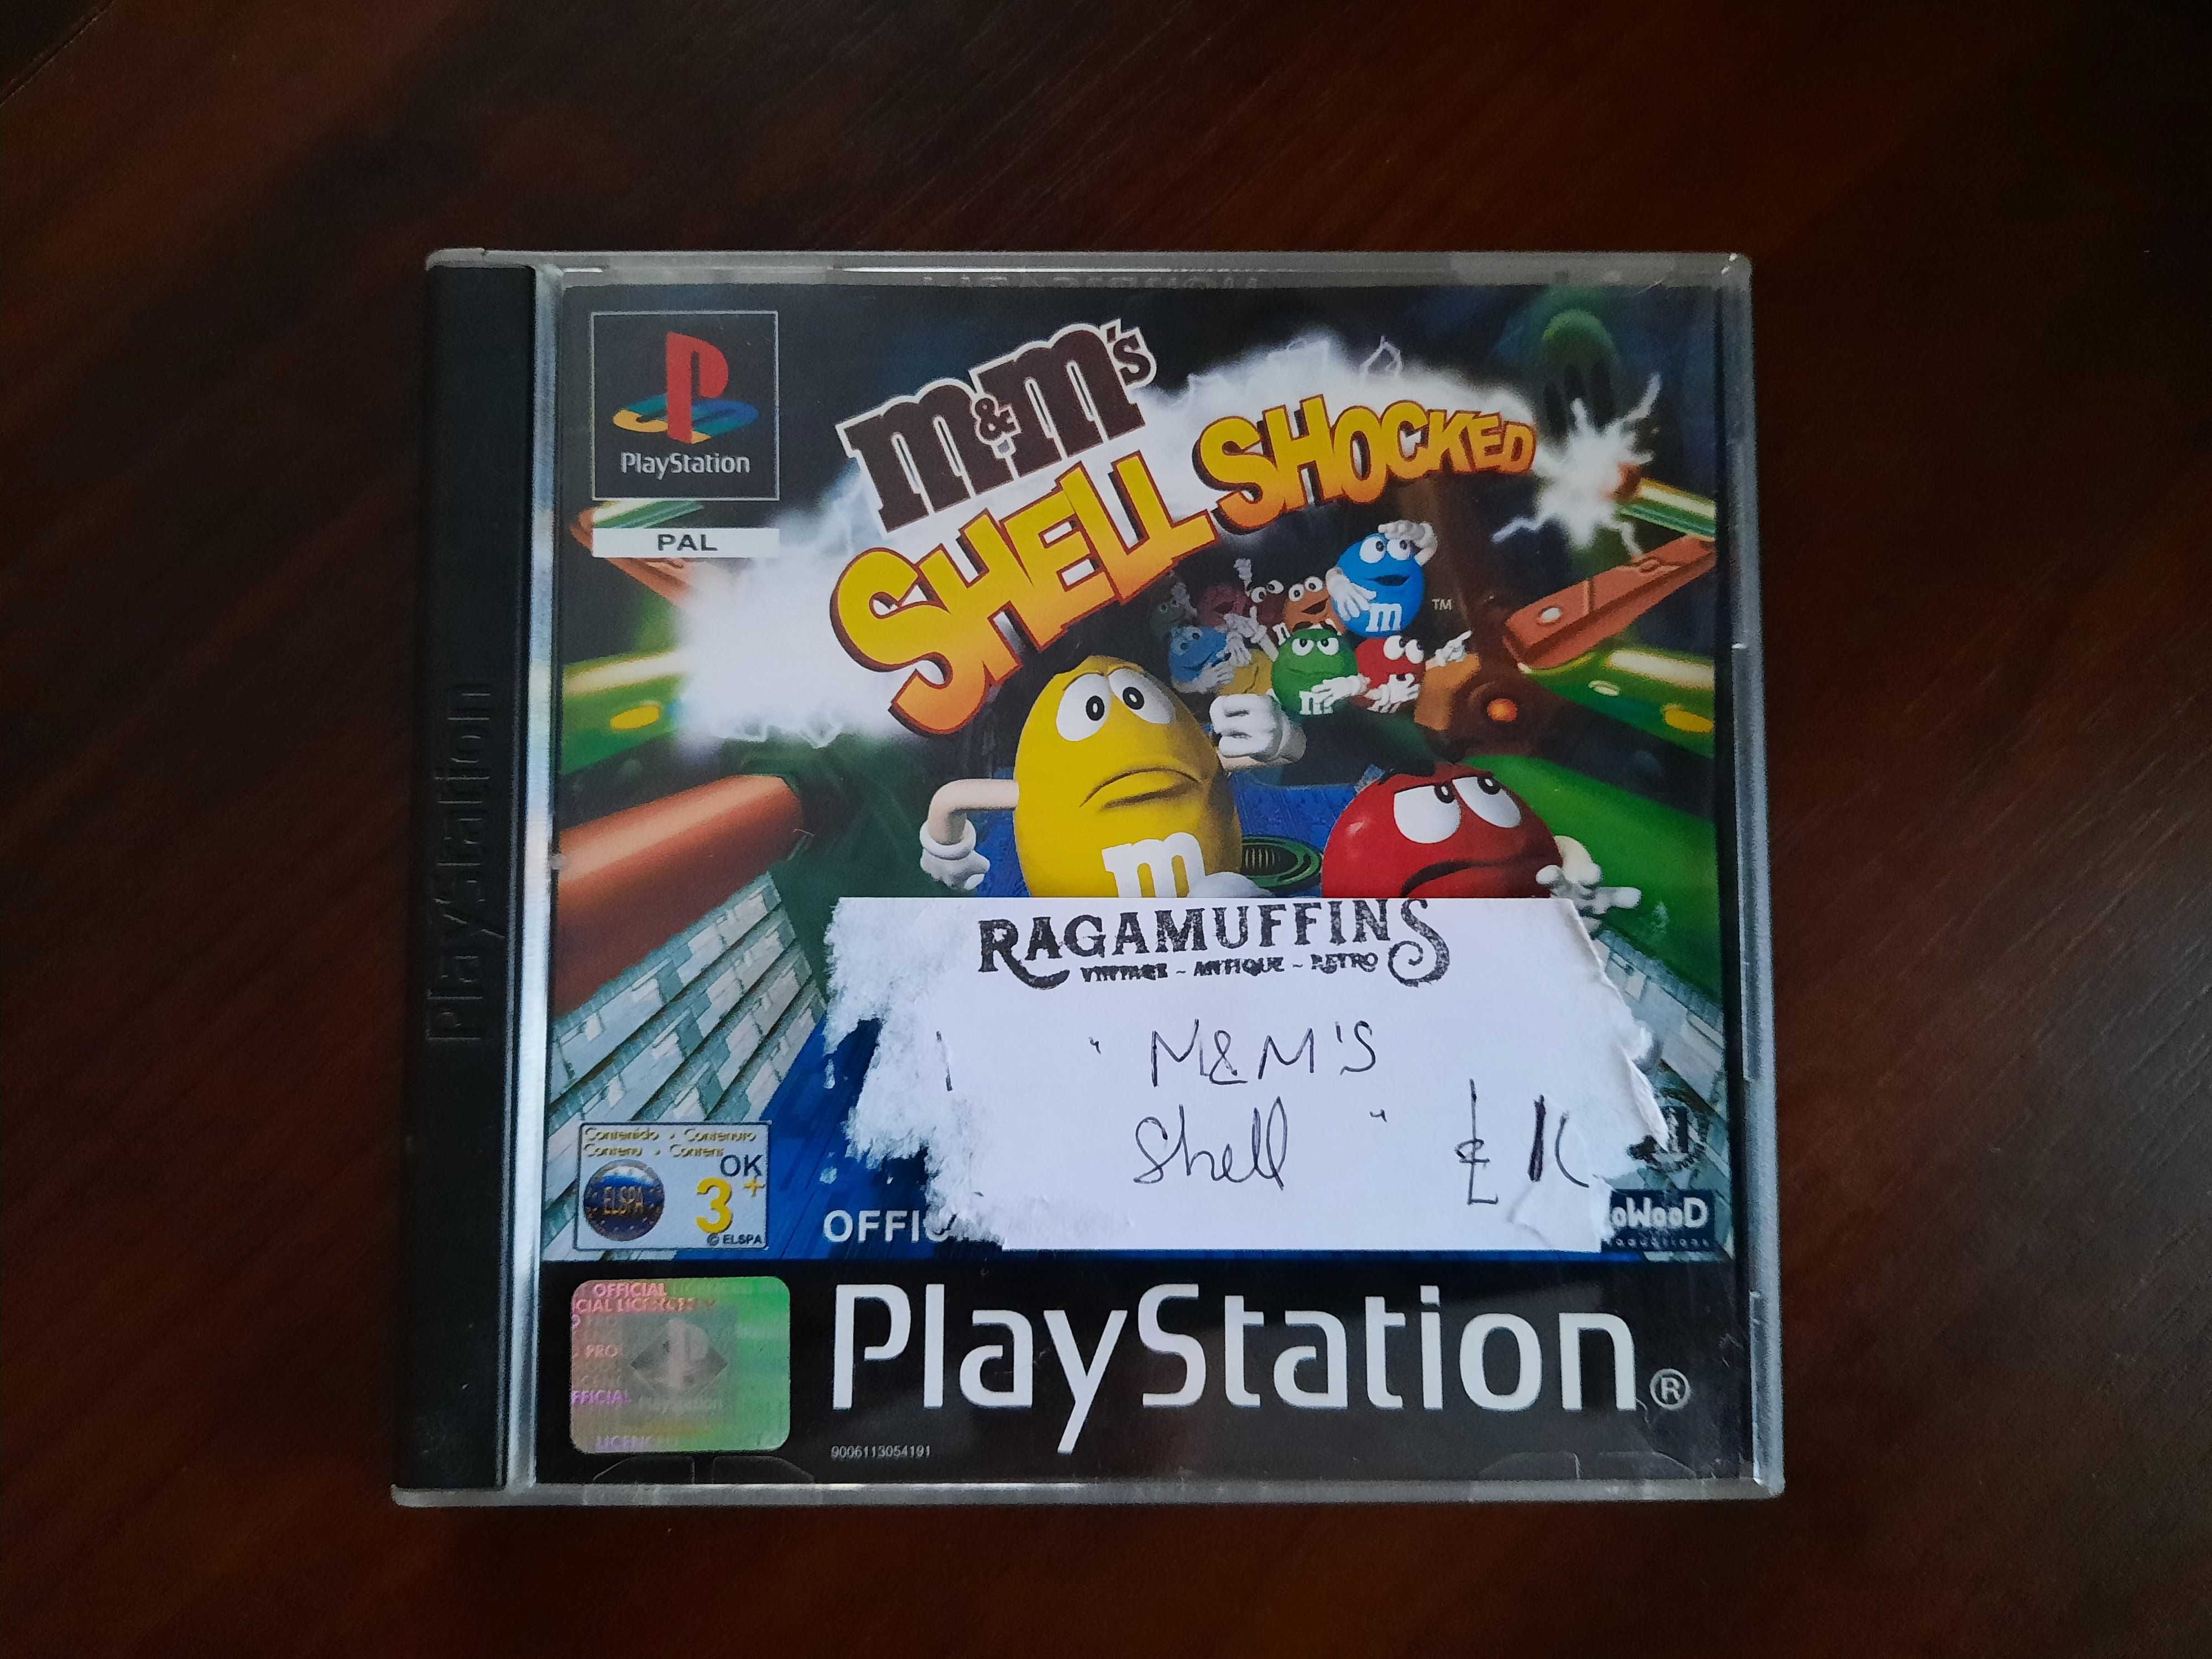 M&M's Shell Shocked gra psx ps1